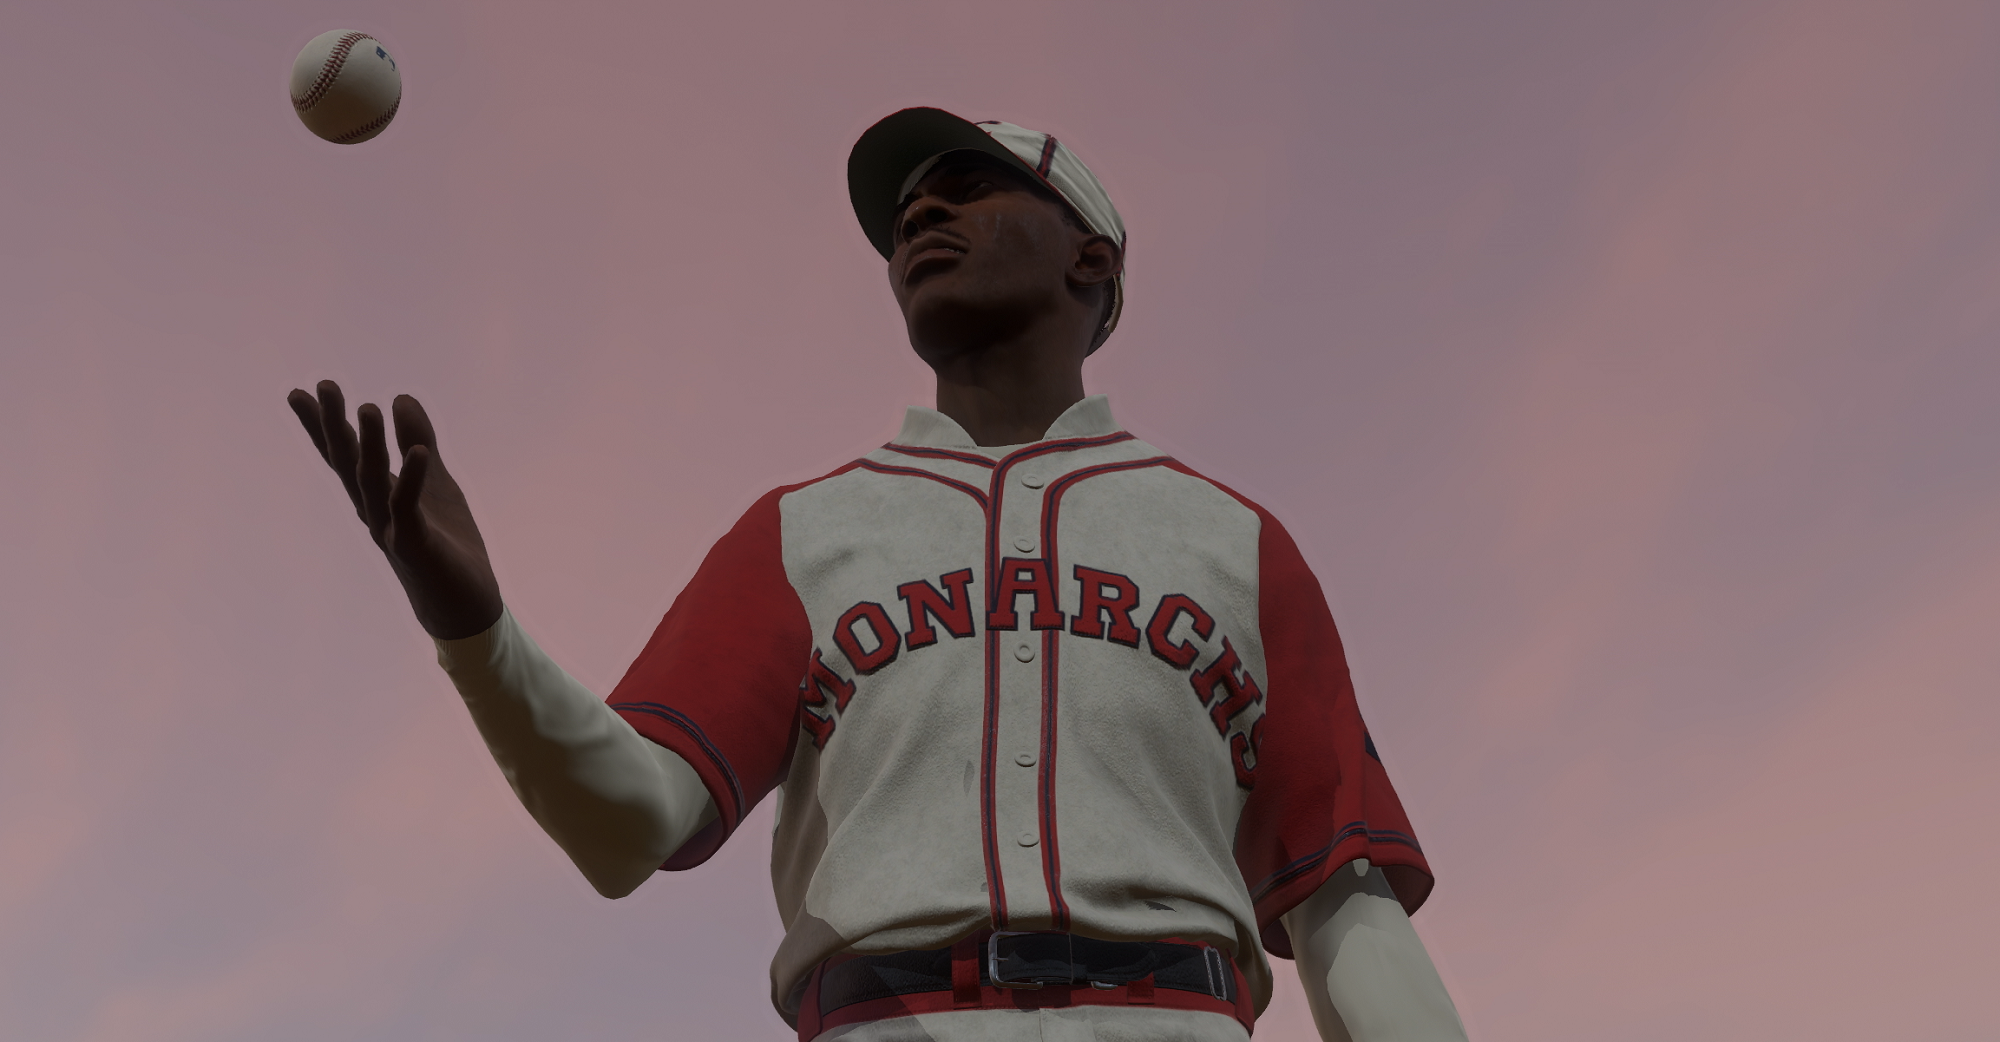 Image for Restoring a missing piece of history with MLB: The Show's Negro Leagues